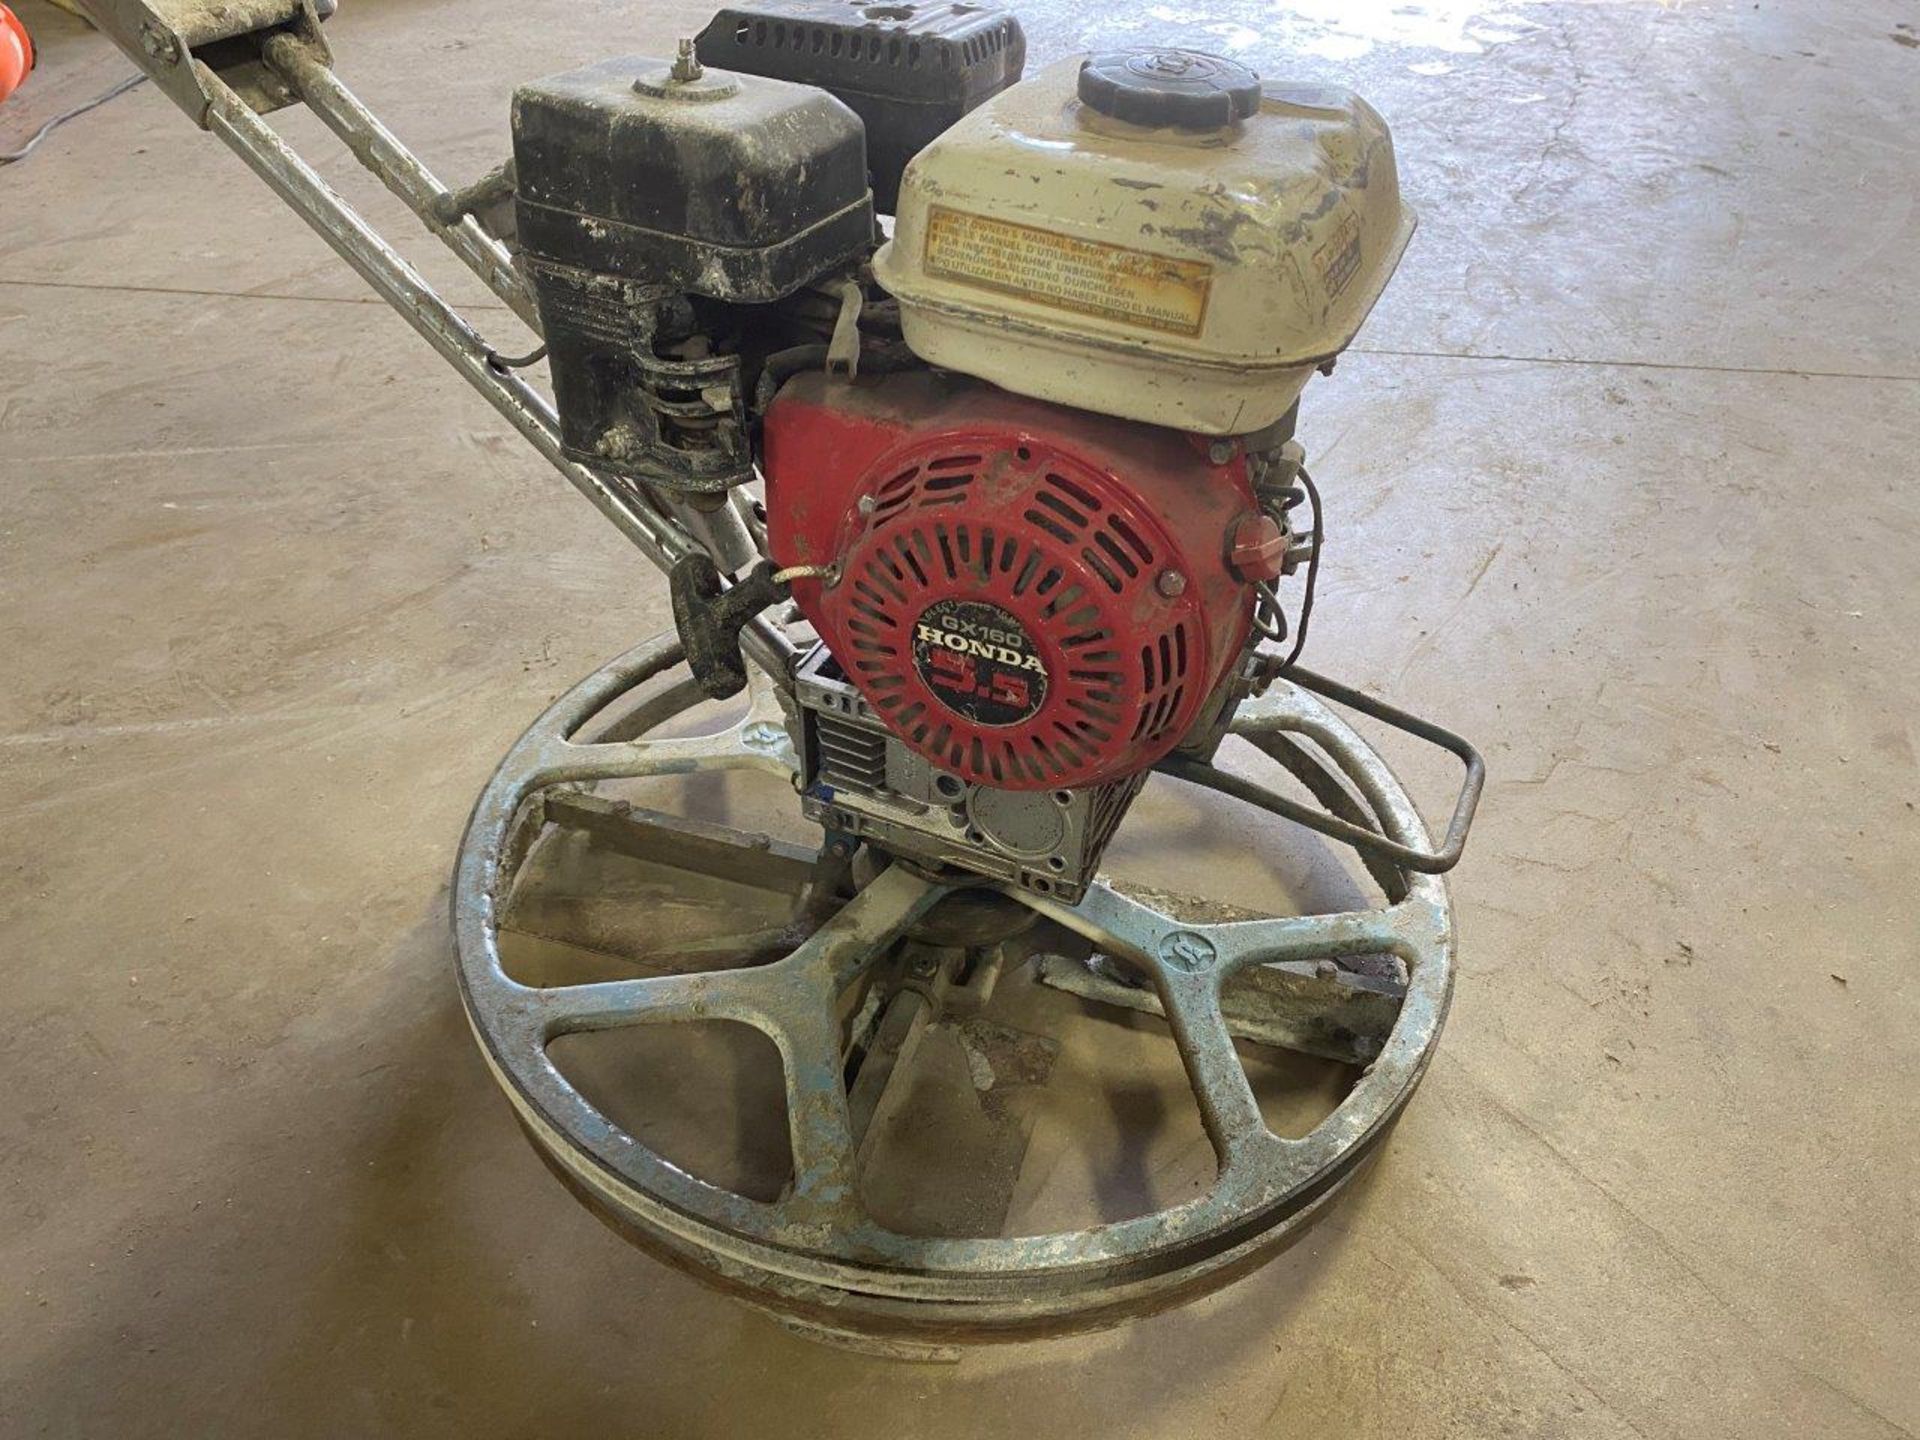 Bartco trowel model unknown, SN 61355, Honda gas powered engine, 24 inch diameter, use for edging. - Image 3 of 4